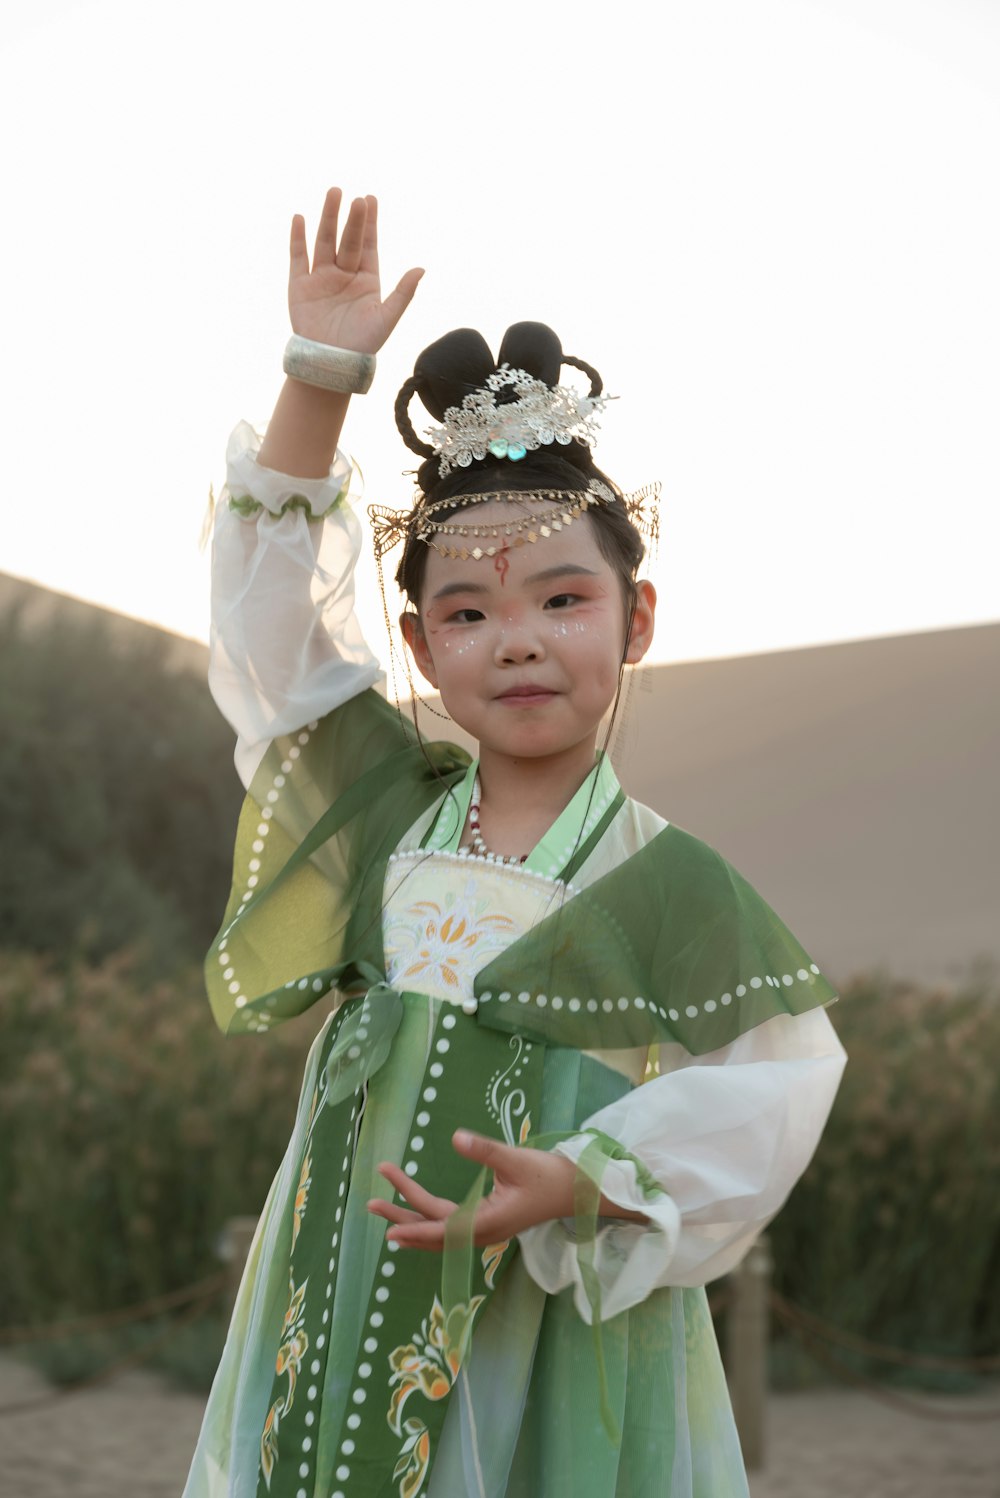 a little girl dressed in a green and white costume